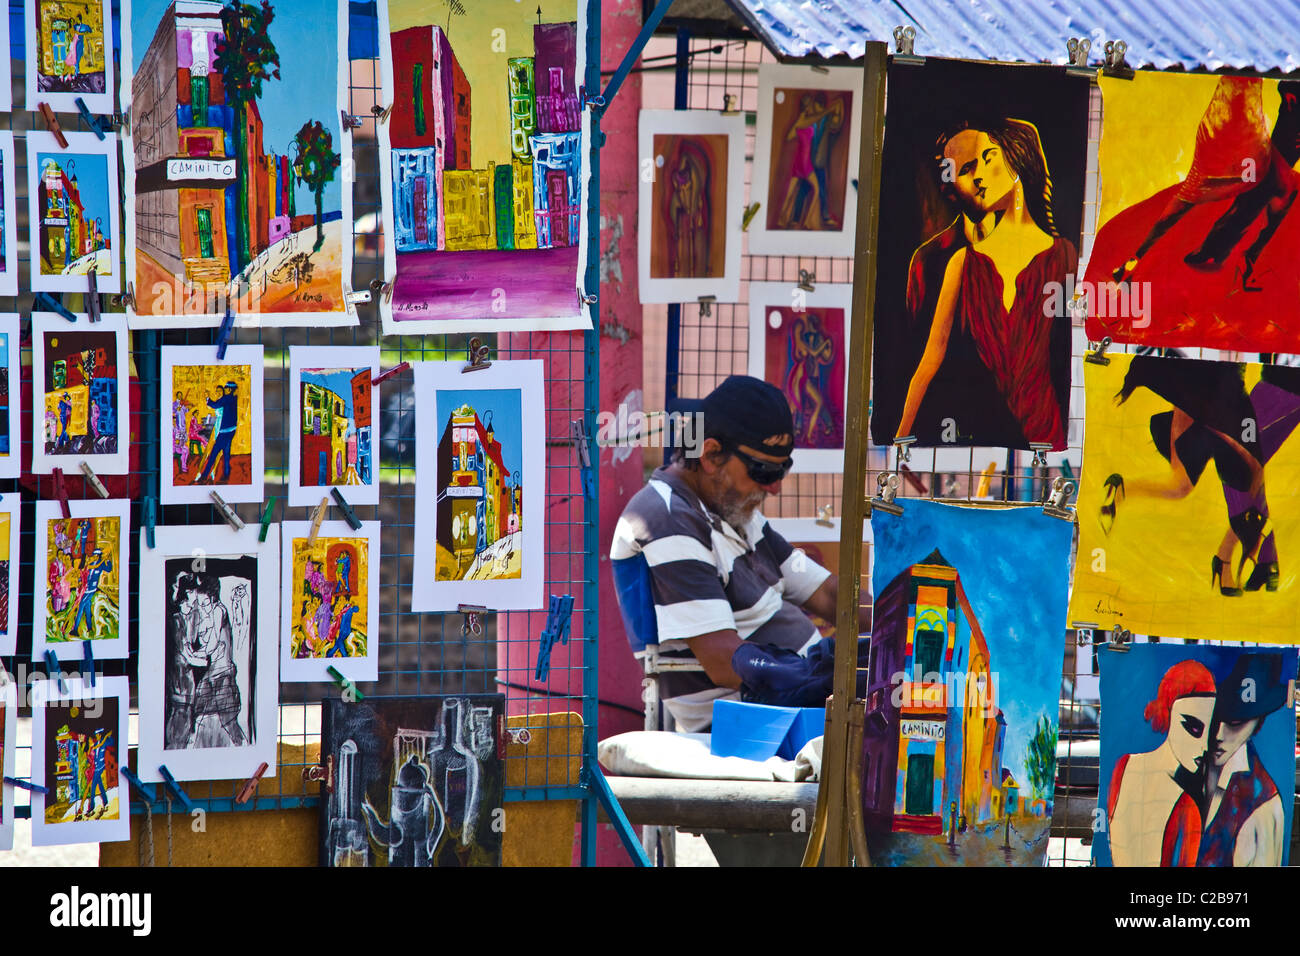 A market stall displays colorful paintings featuring Tango dancers. Stock Photo